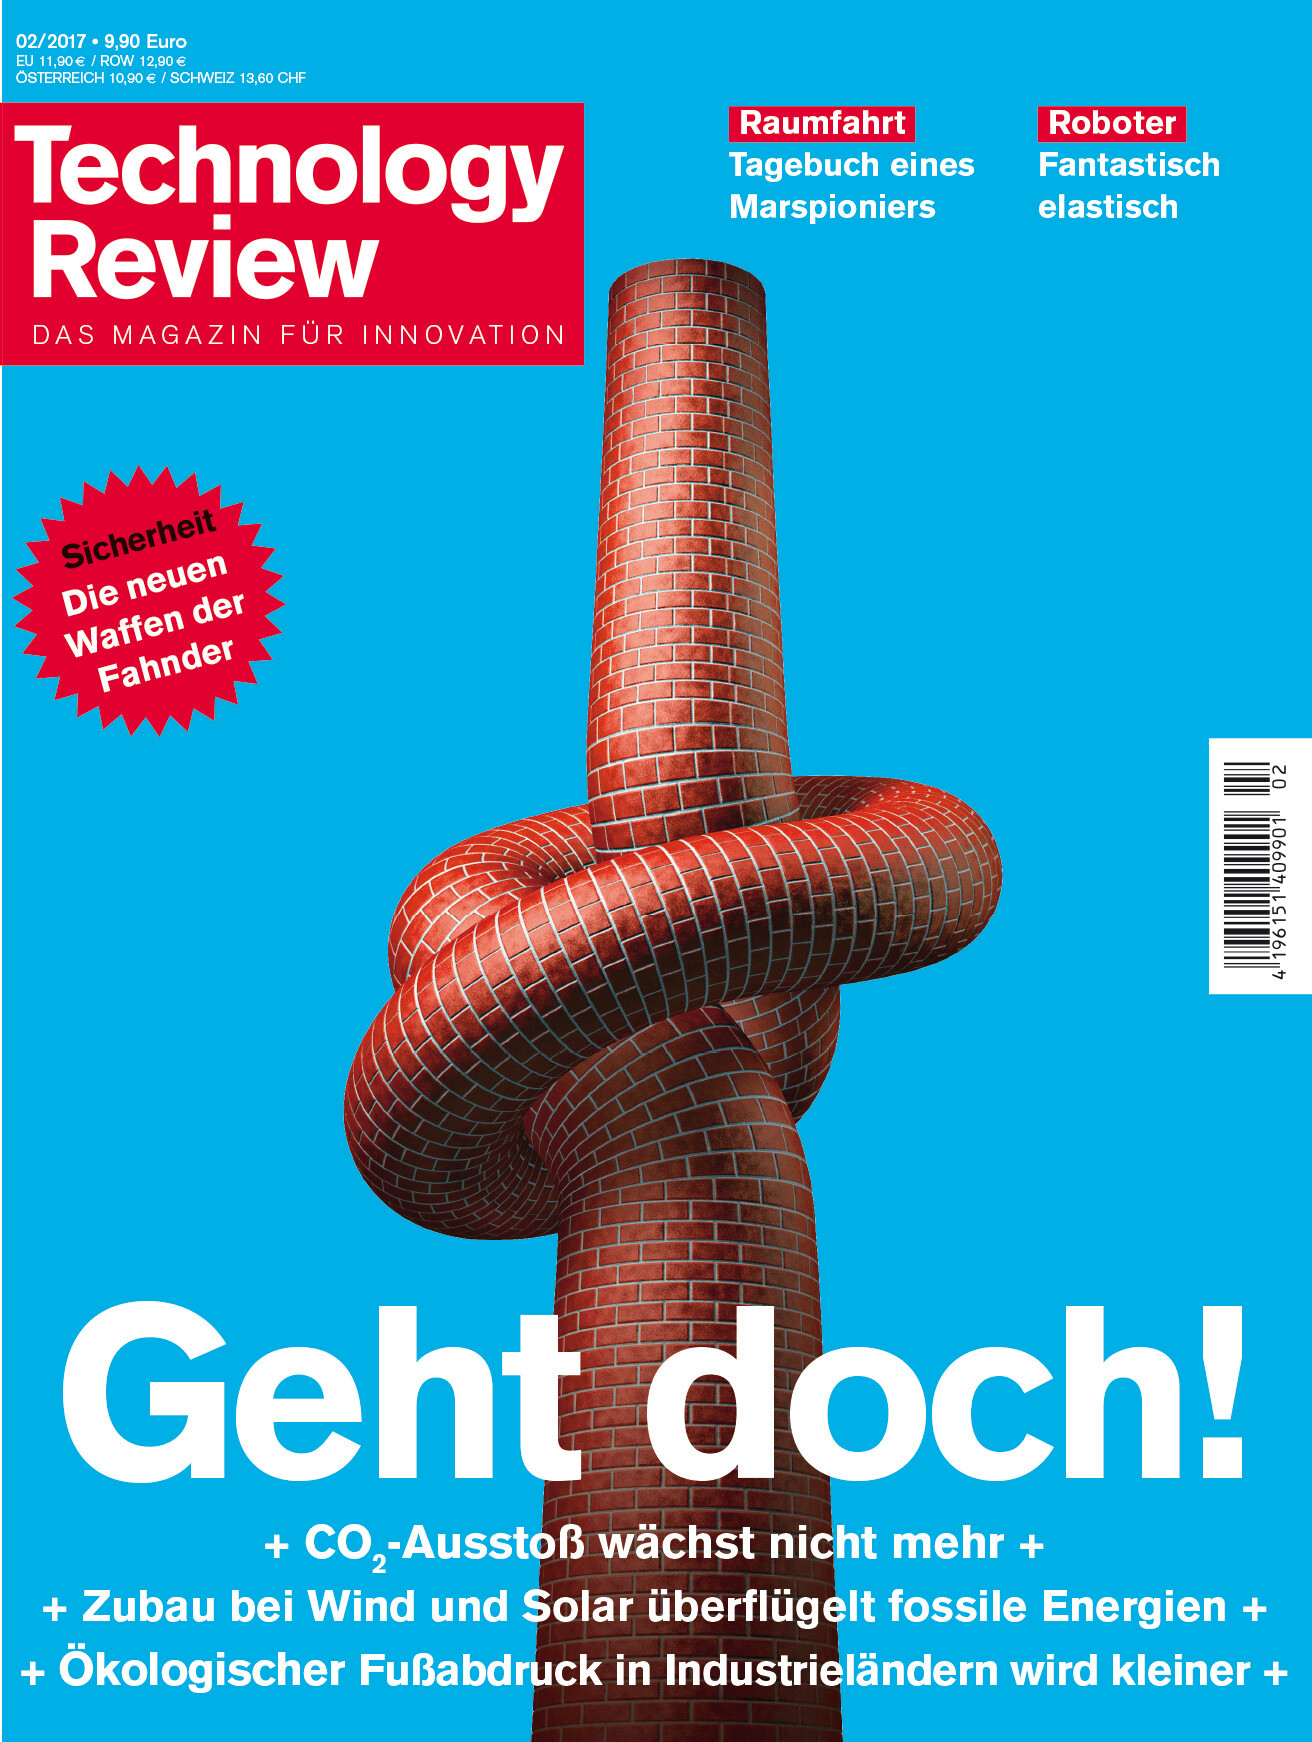 Technology Review 2/2017